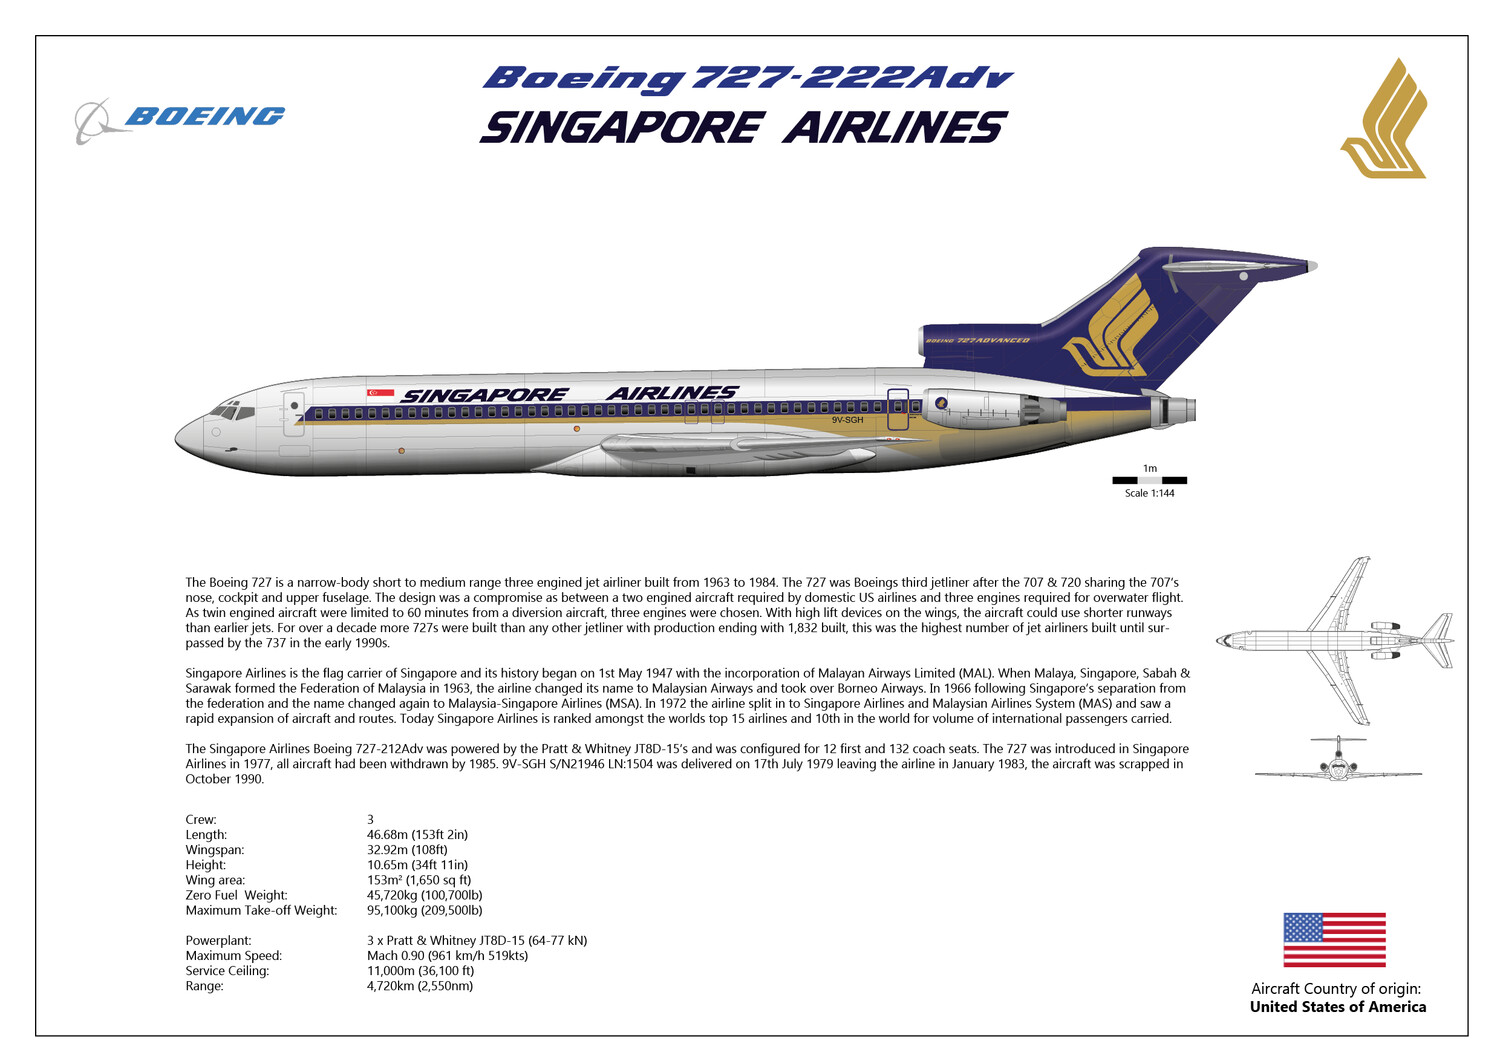 Boeing 727-200Adv Singapore Airlines